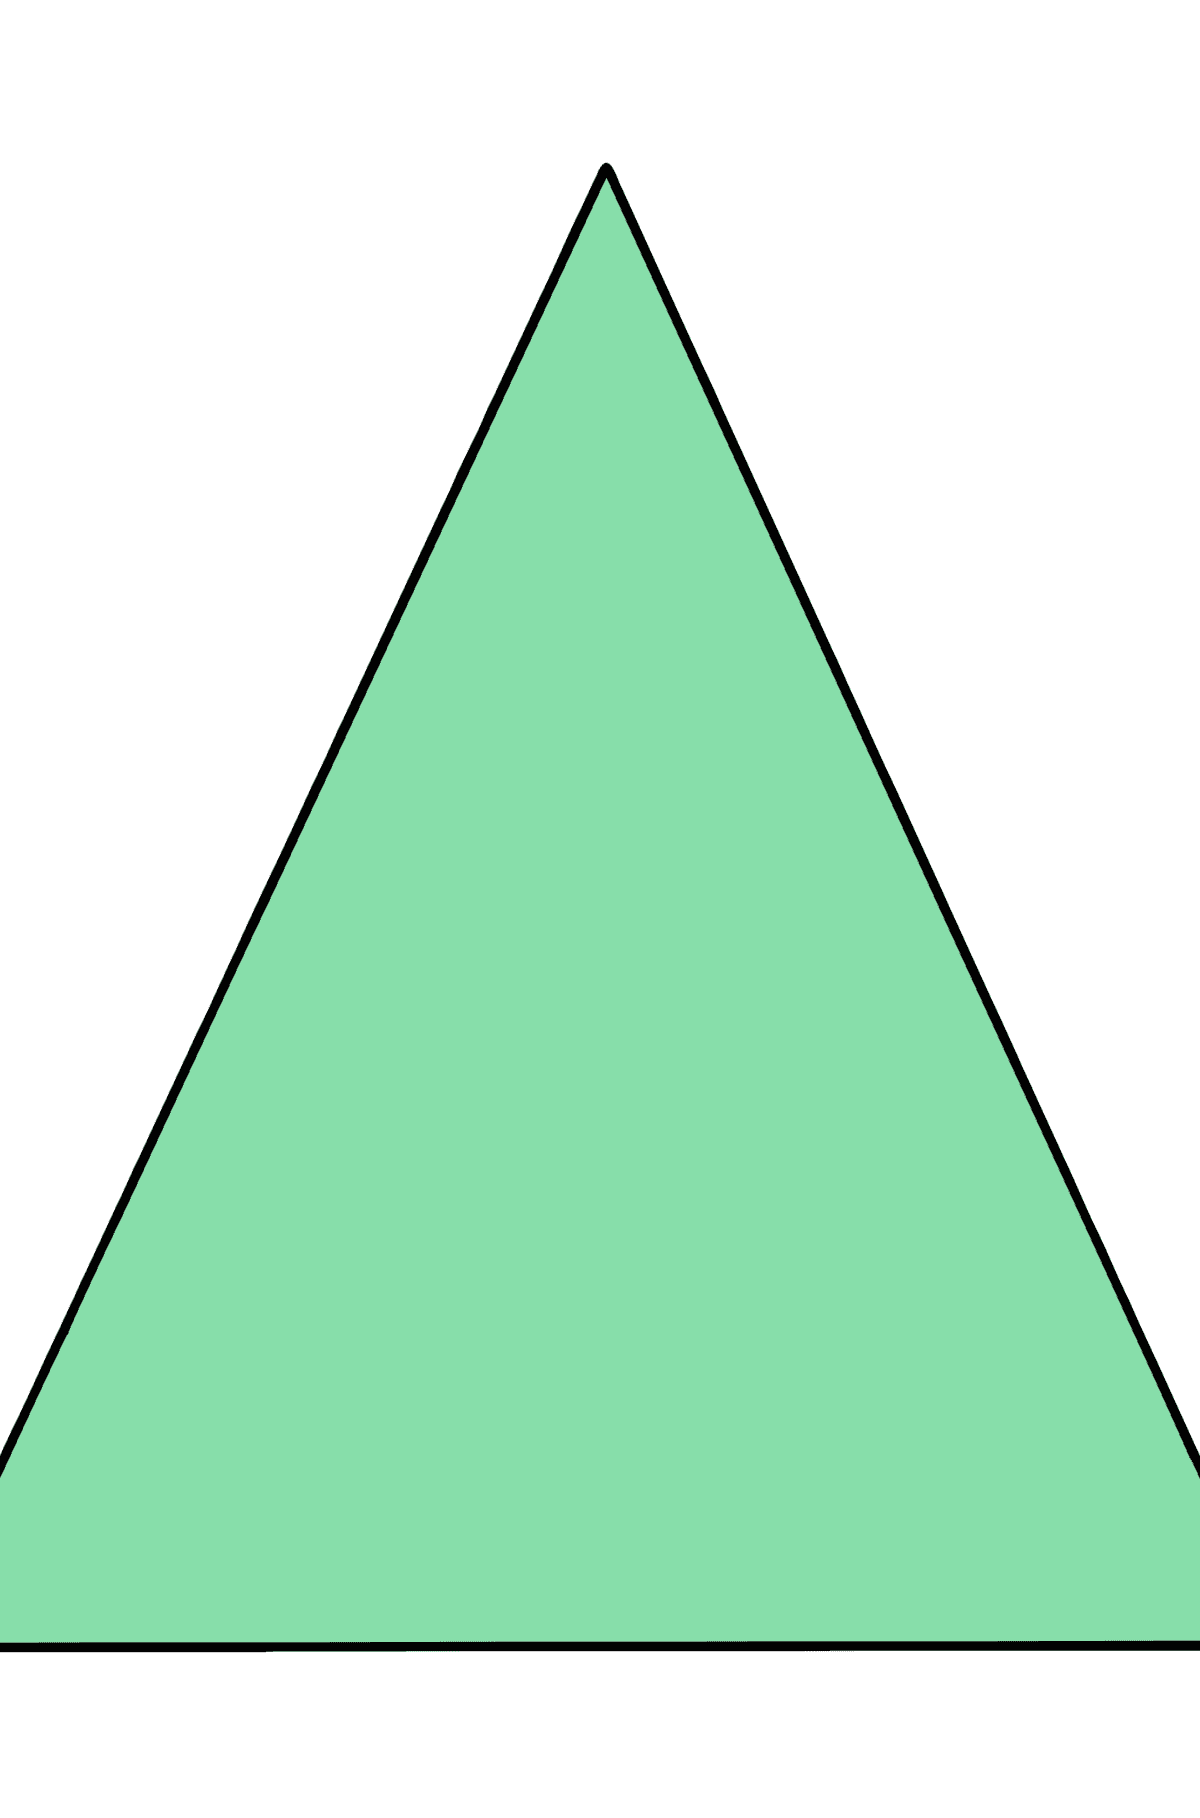 Triangle coloring page - Coloring Pages for Kids